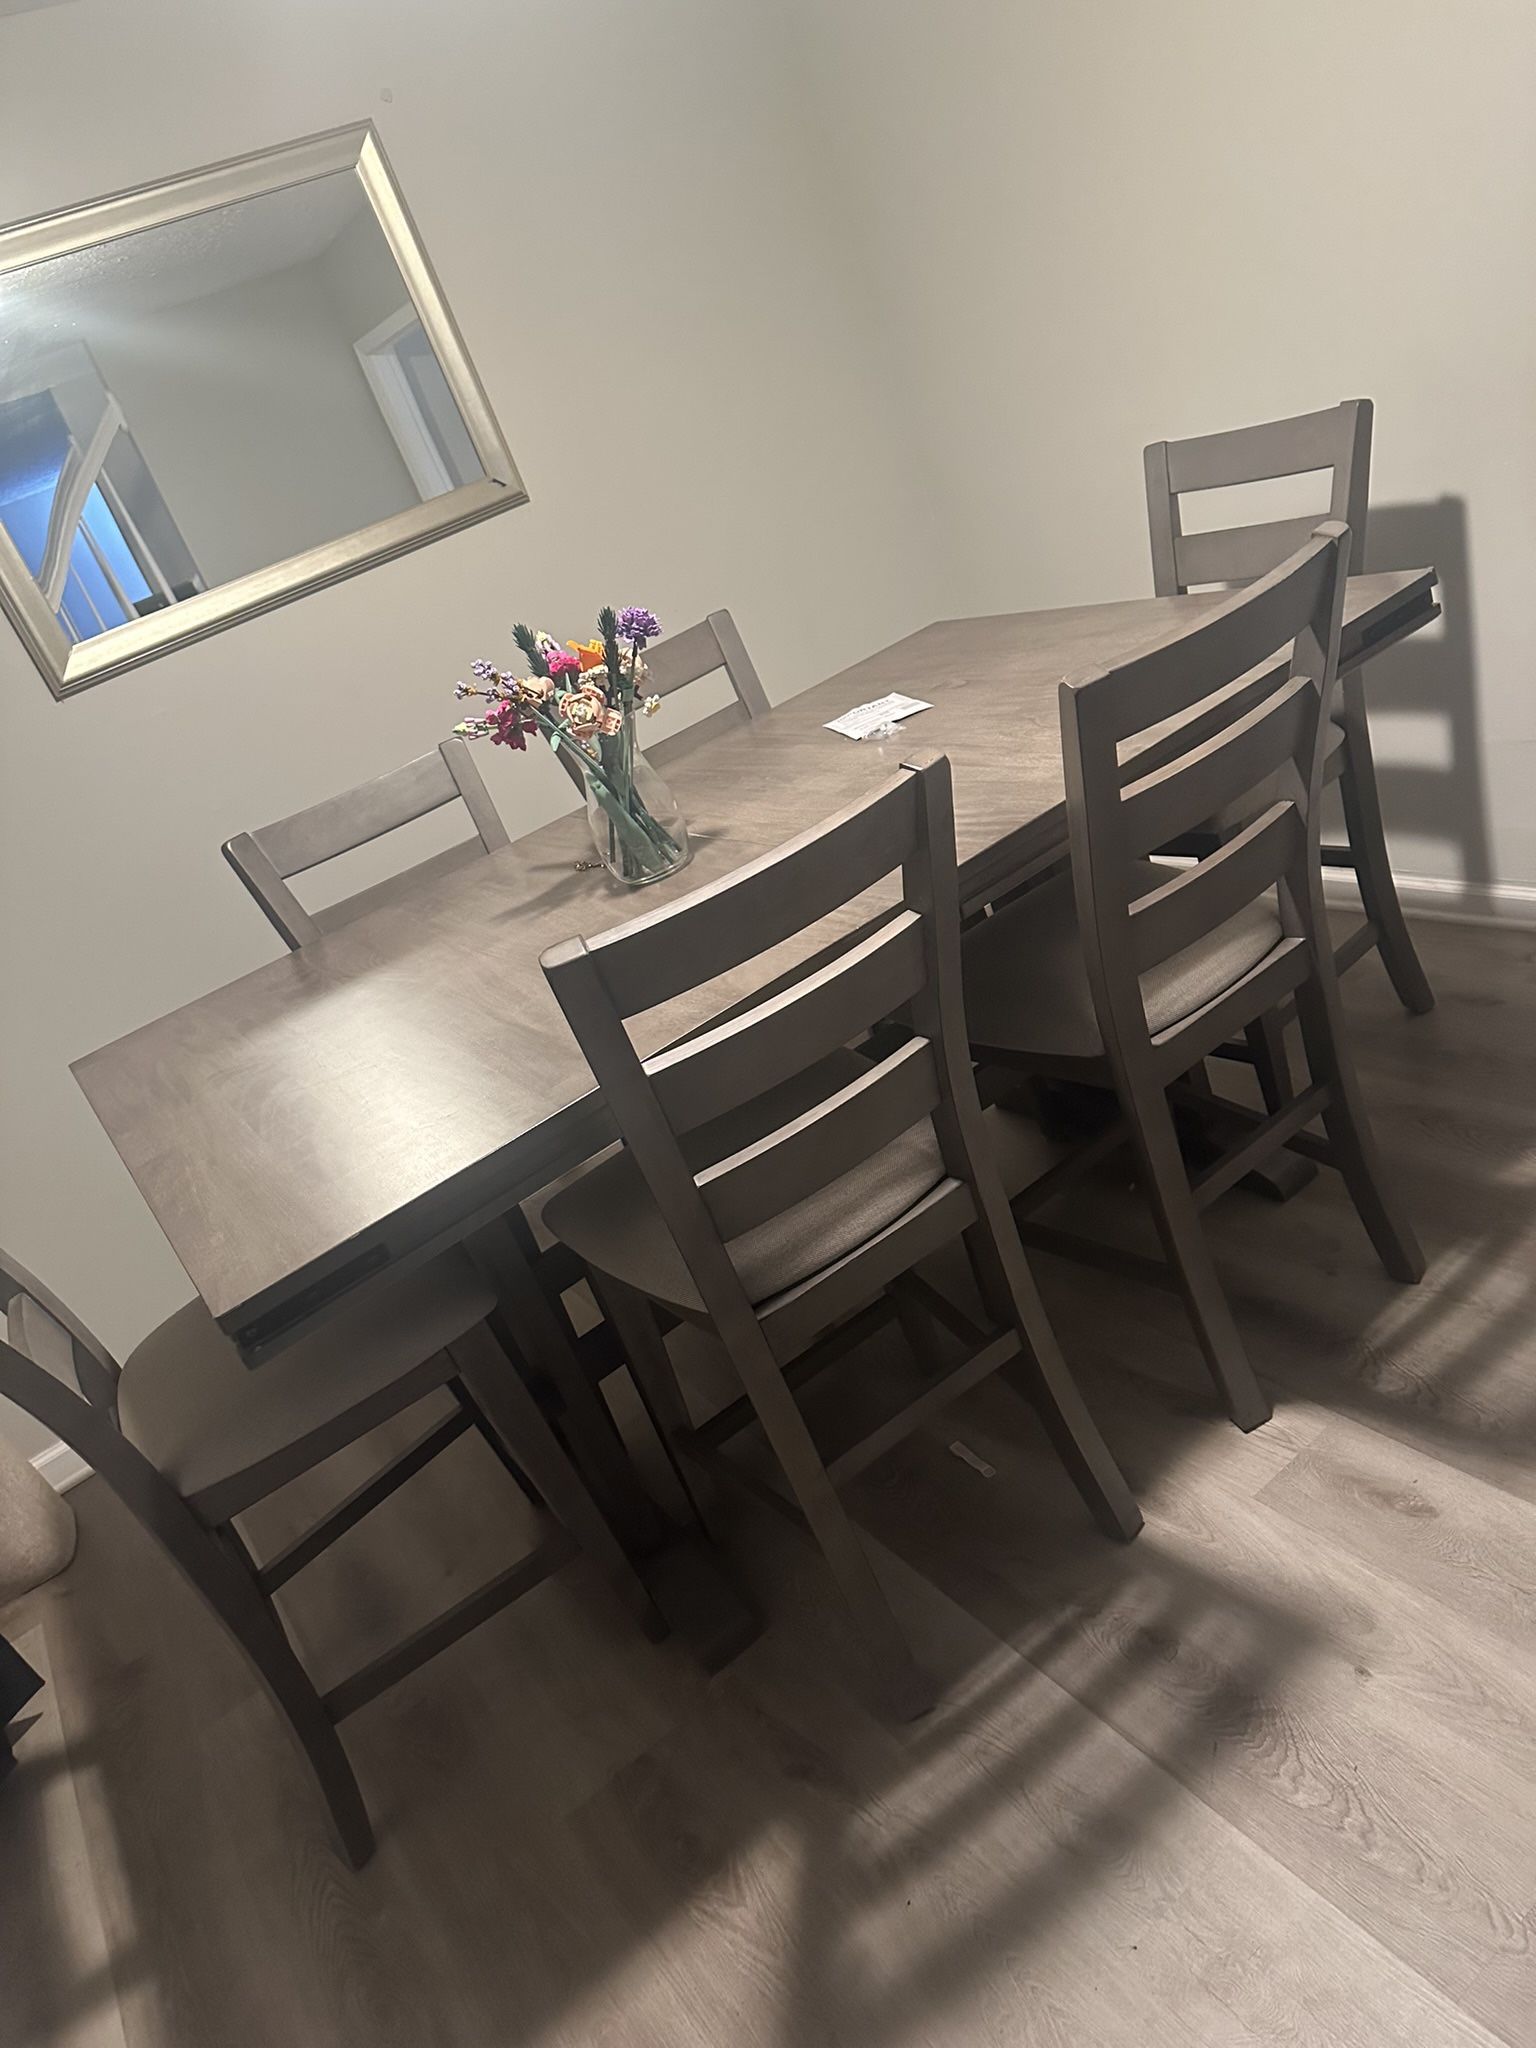 6 Seat Dining Table Set 